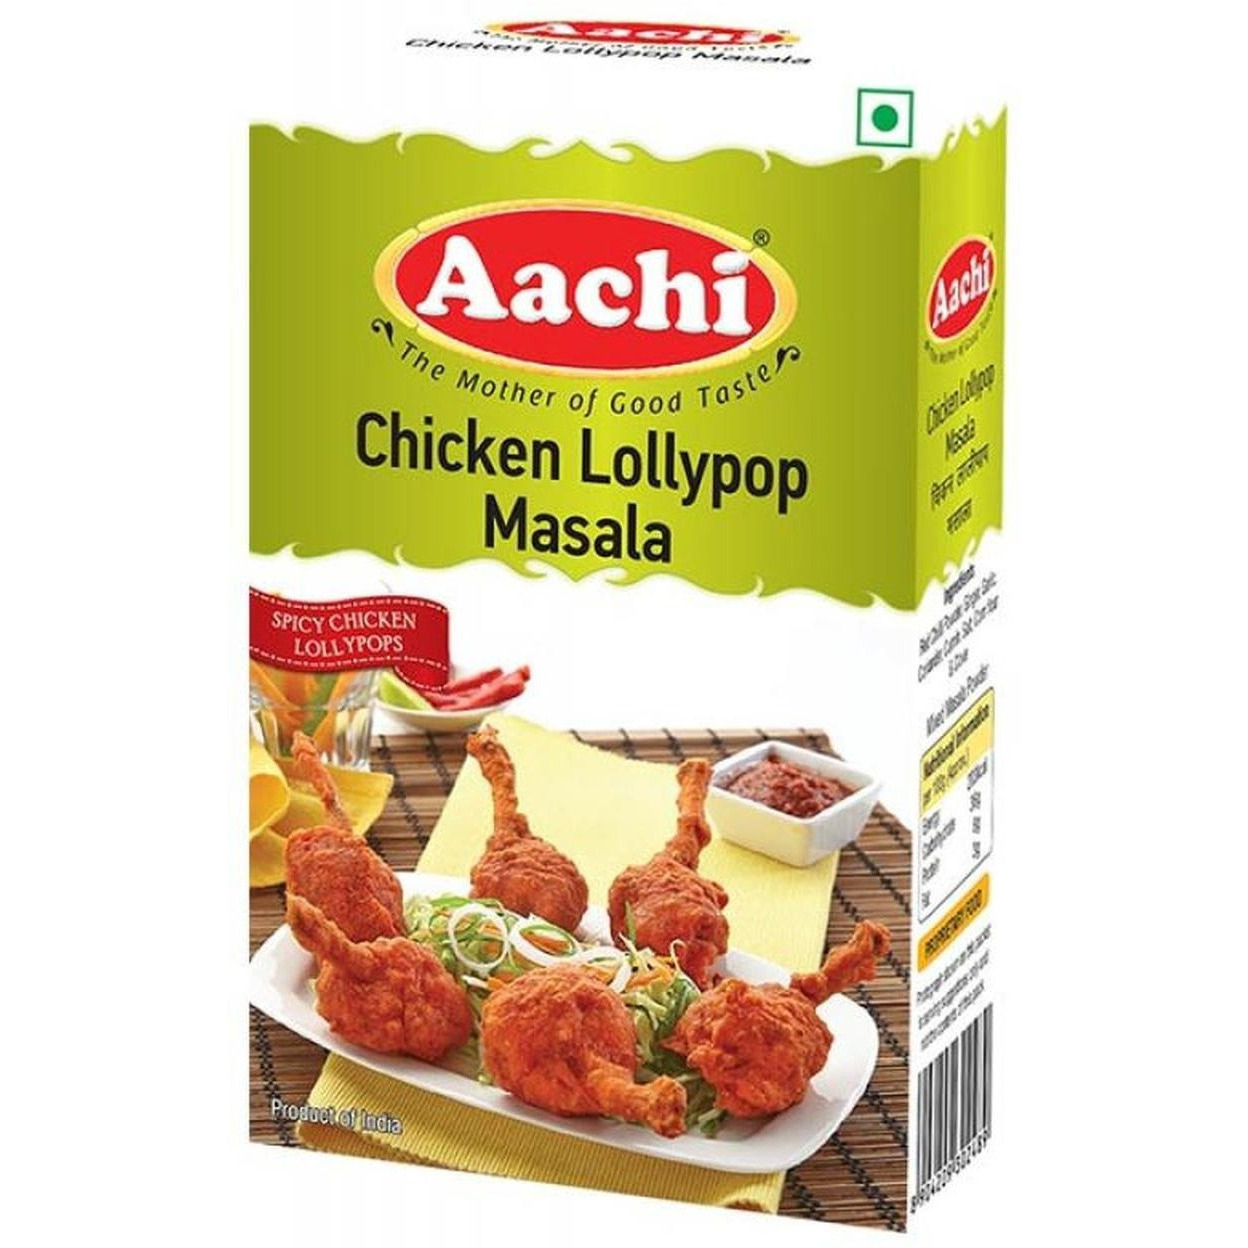 Pack of 5 - Aachi Chicken Lollypop Masala - 200 Gm (7 Oz)